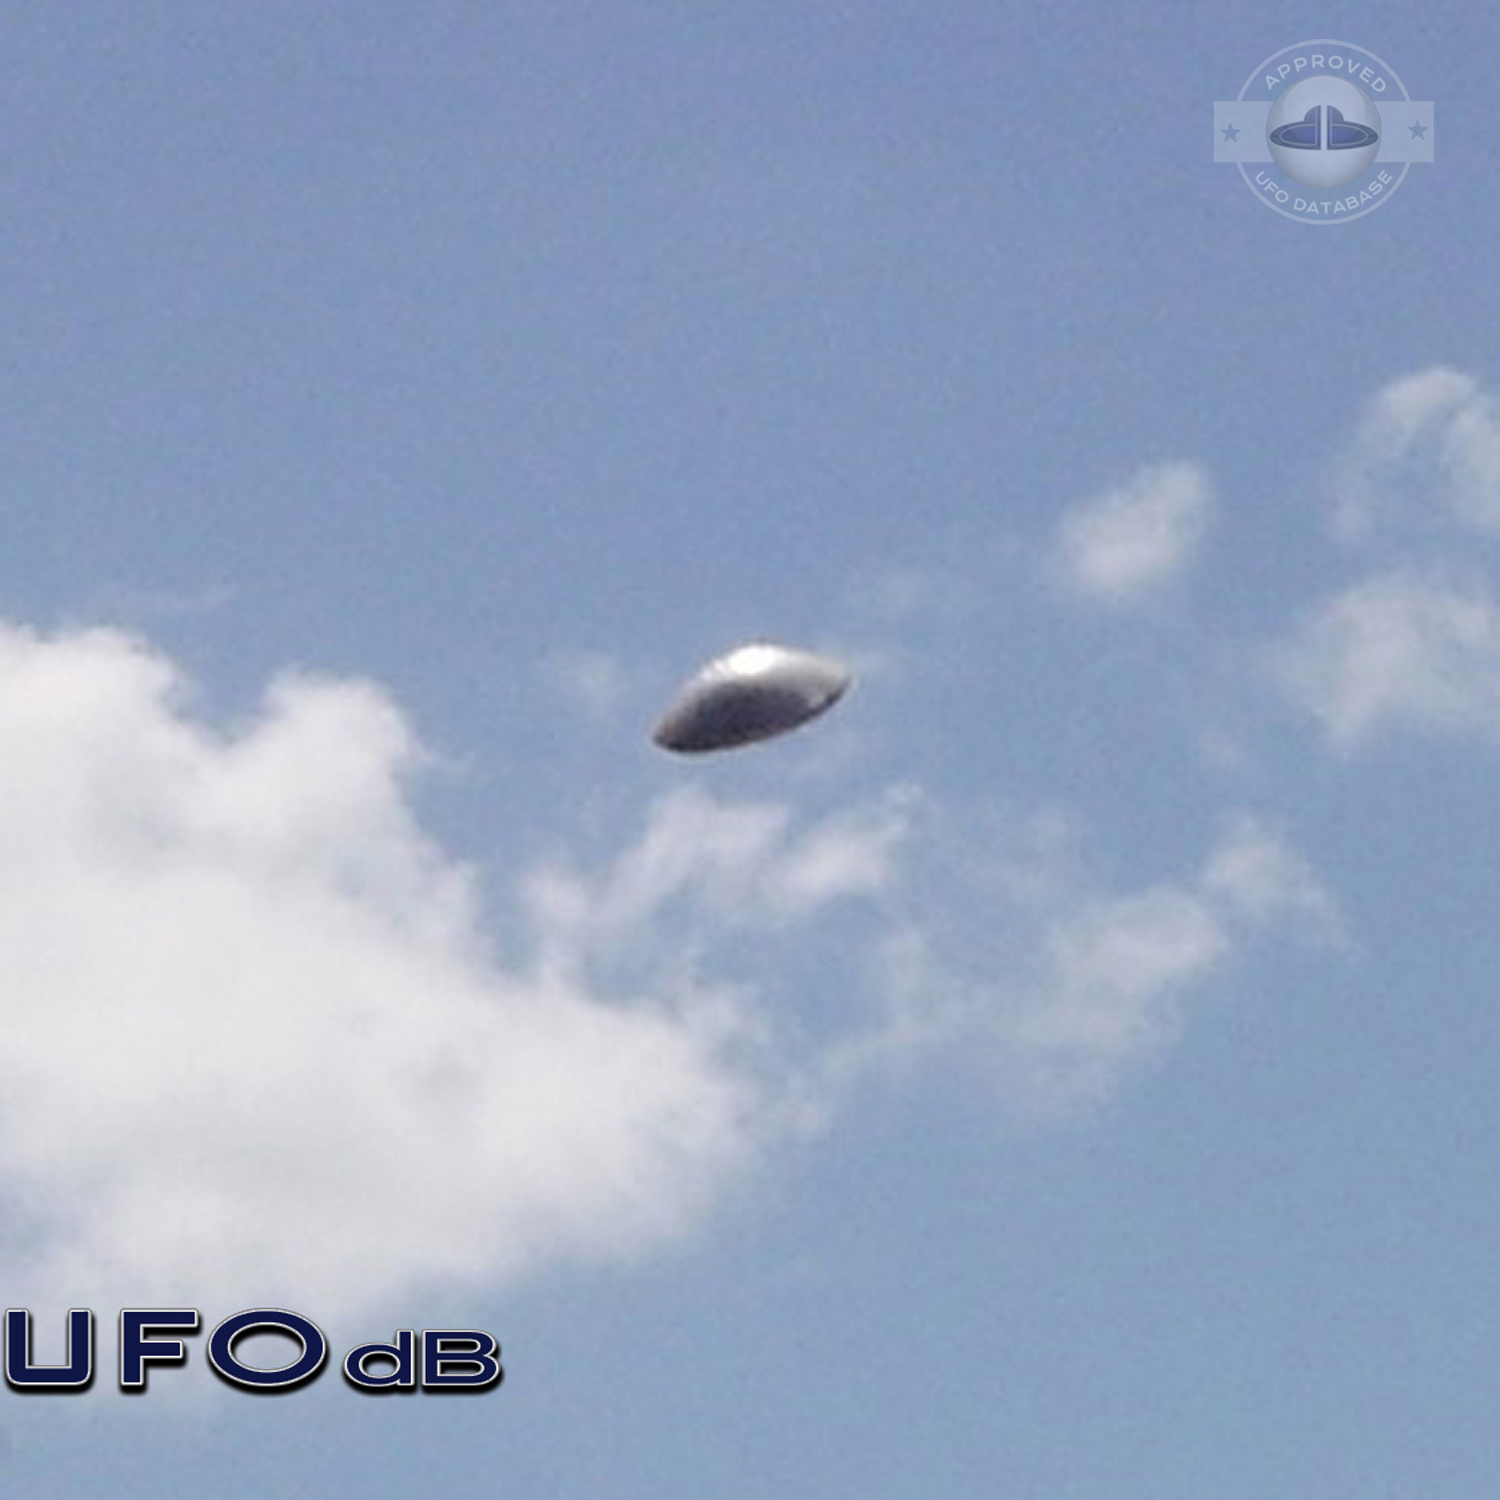 UFO with silver dome shape in clear blue sky. UFO picture Alagamar UFO Picture #86-2